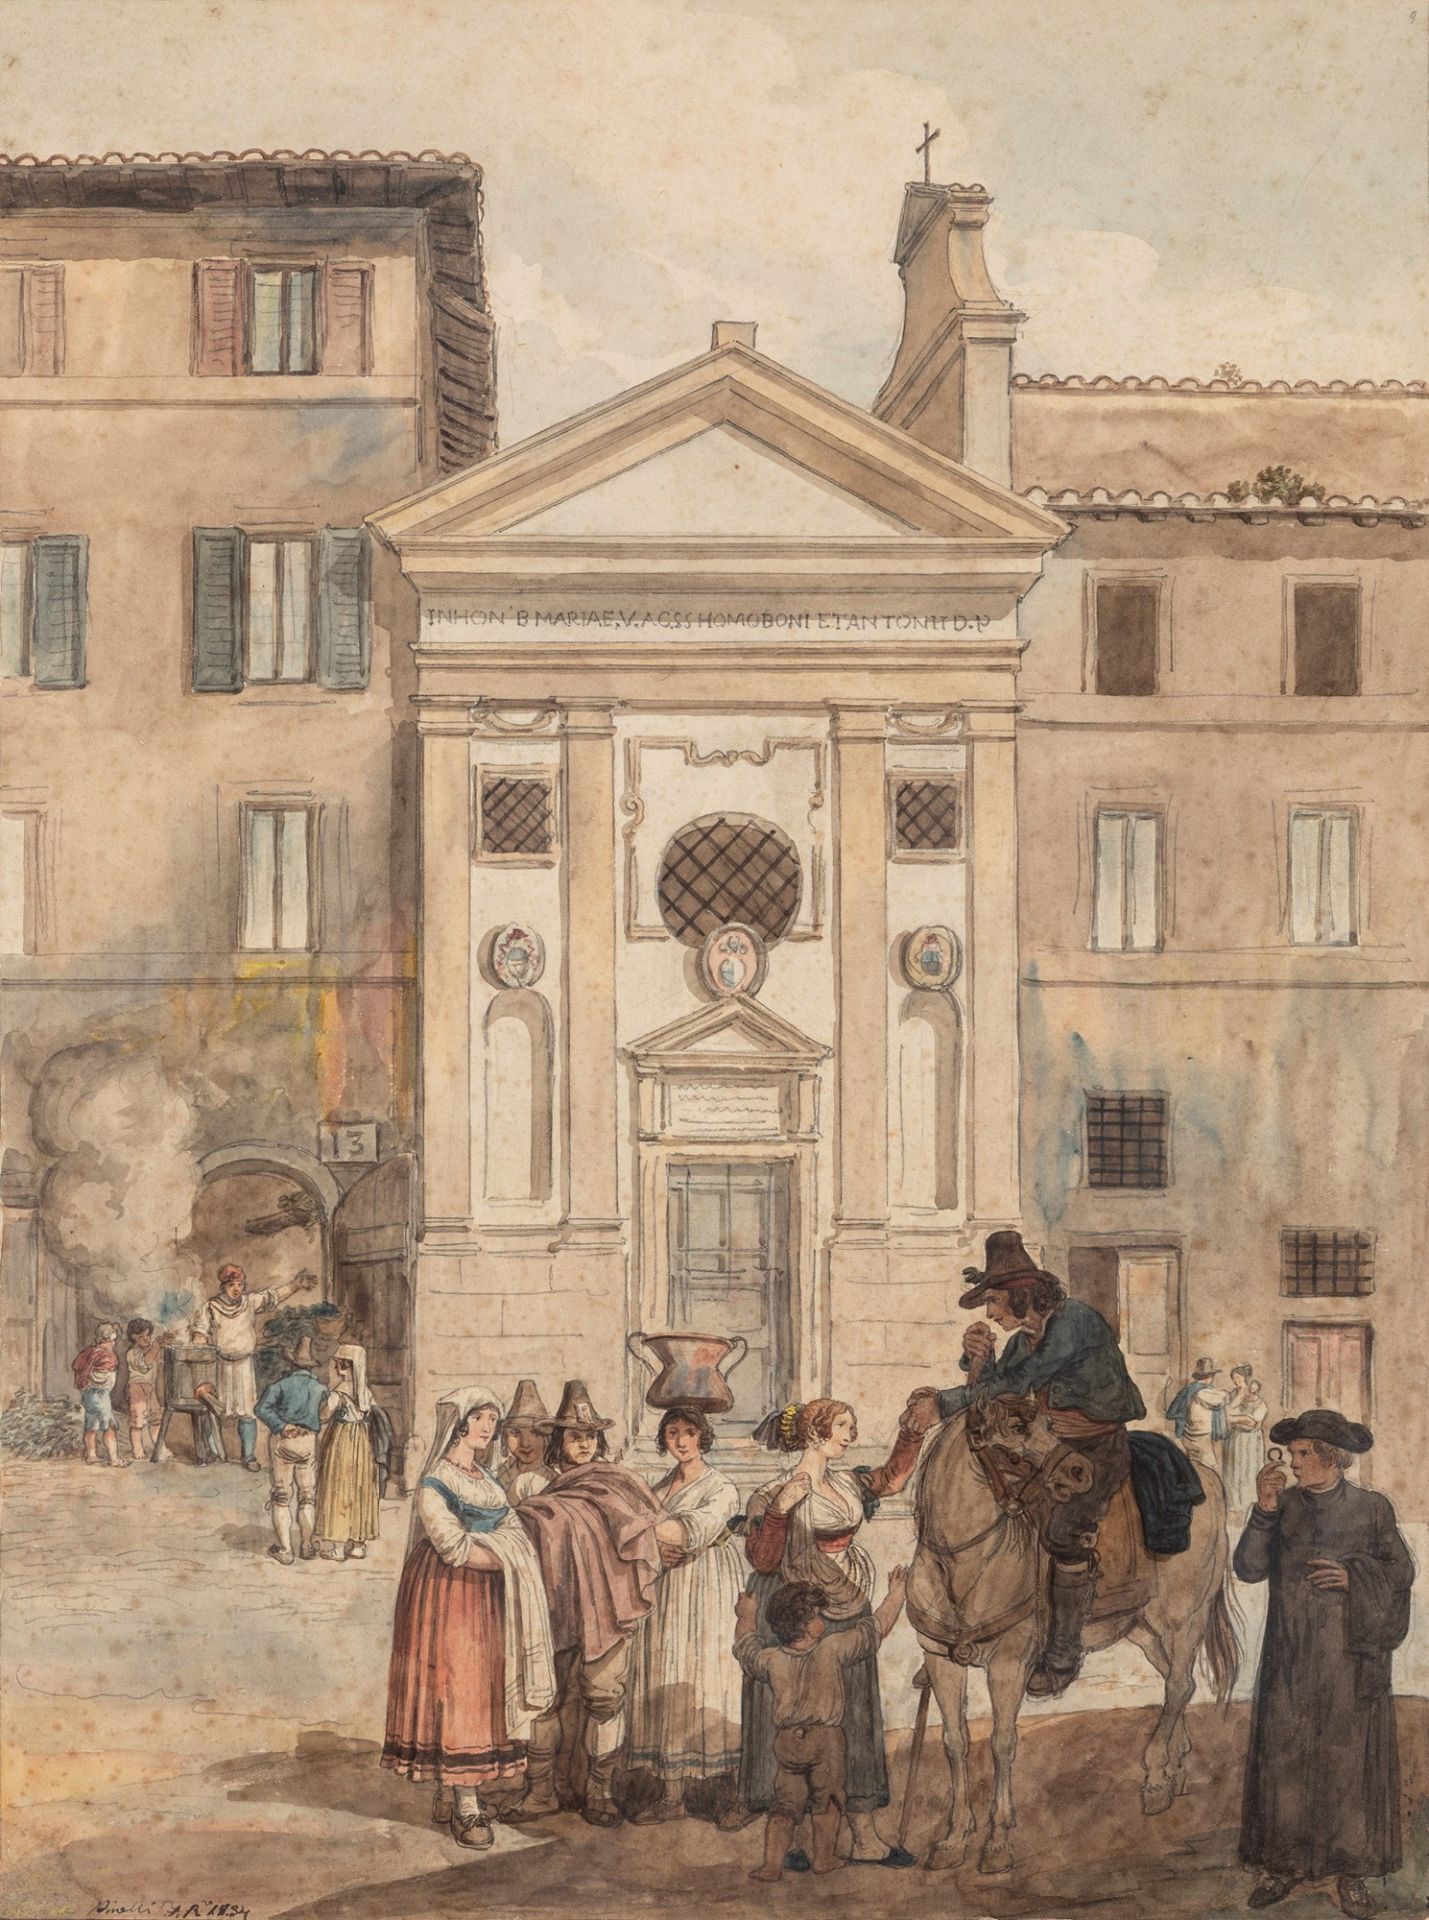 Bartolomeo Pinelli (Roma 1781-1835) - Rome, life in front of the church of S. Omobono, 1834